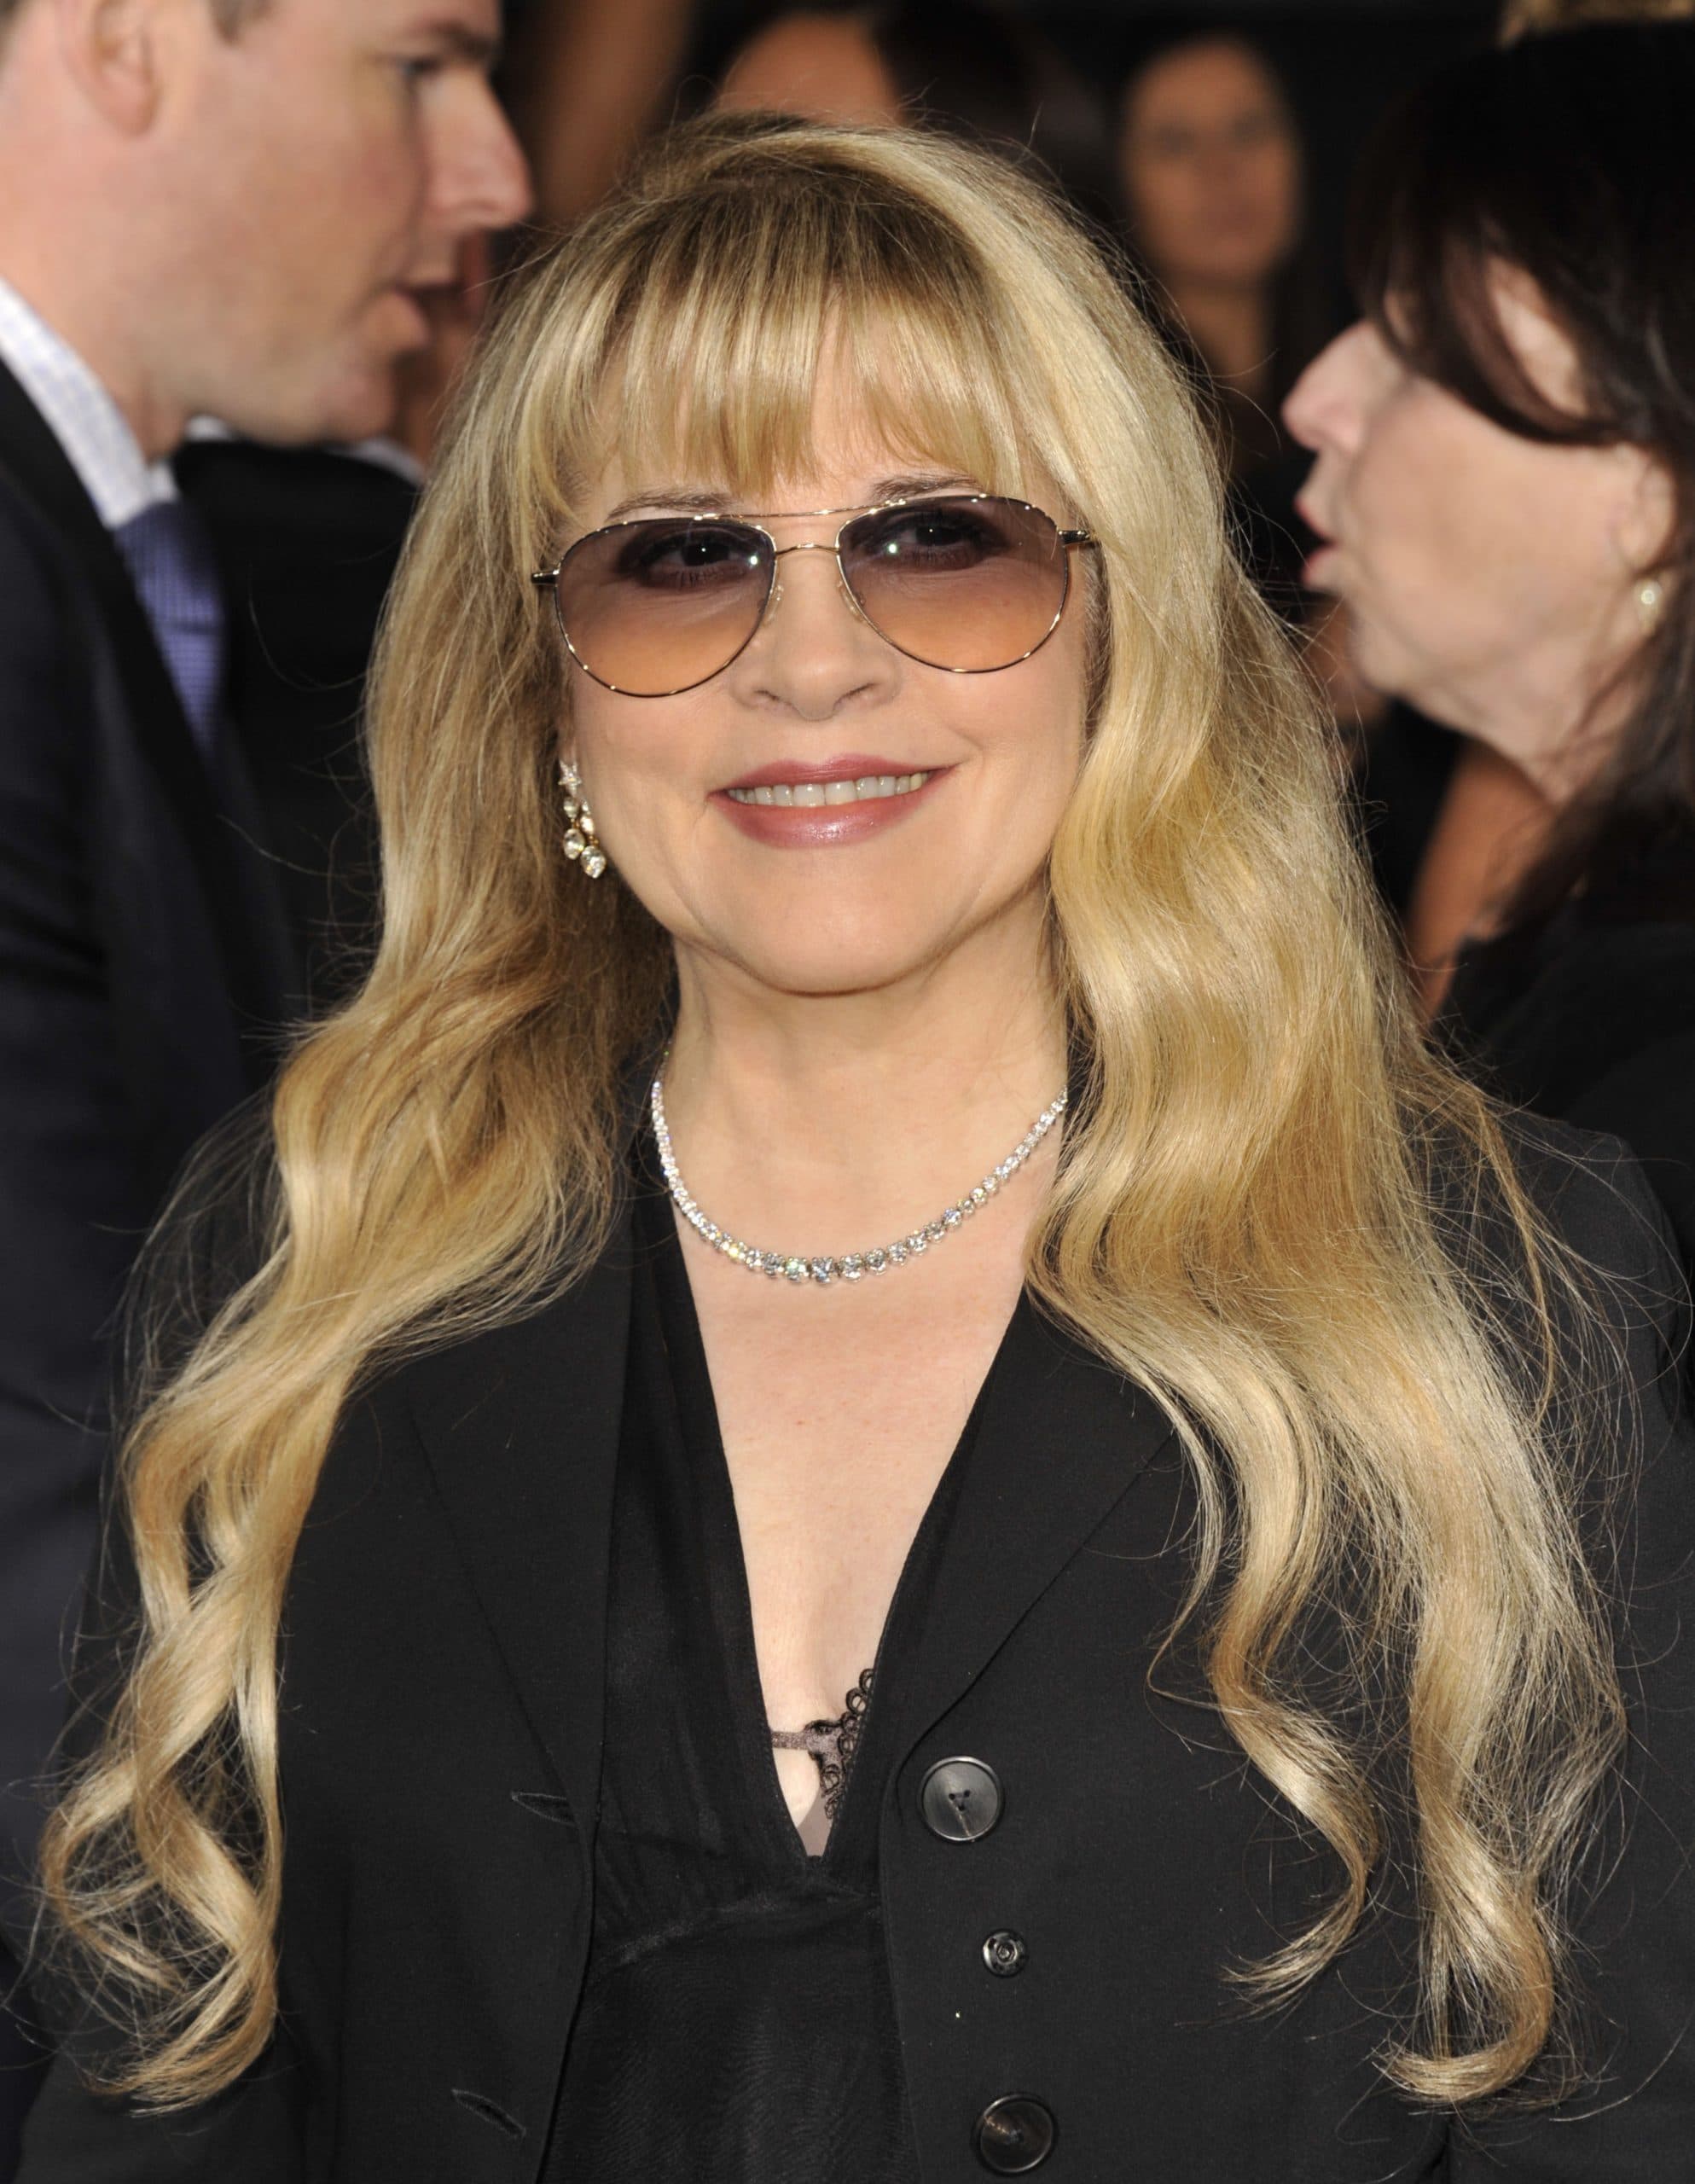 Stevie Nicks Has This One Regret About Fleetwood Mac Founder Peter Green